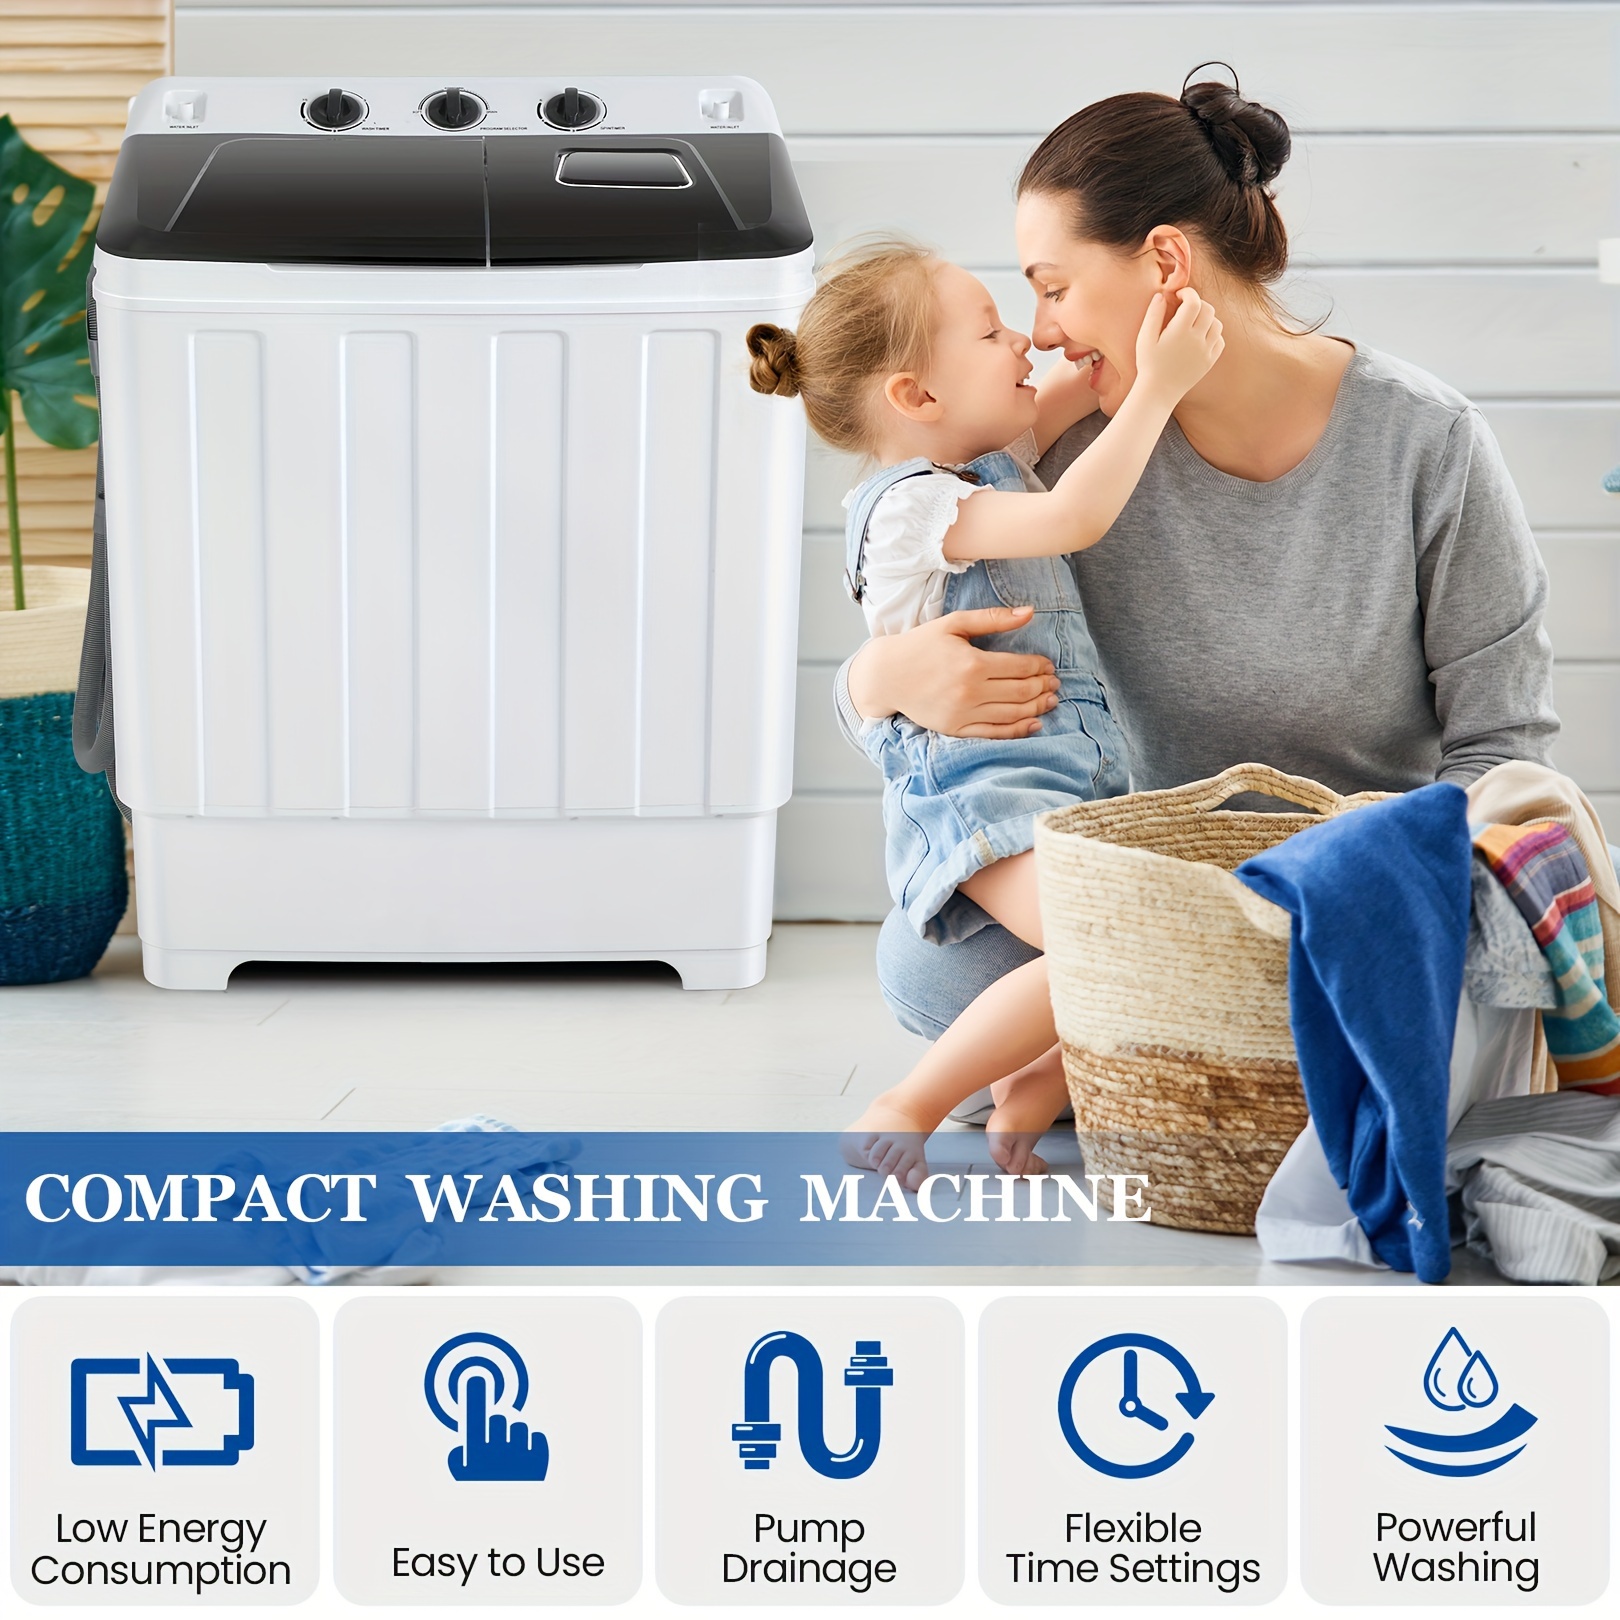 

Portable Washing Machine 30lbs 2 In 1 Compact Twin Tub Washing Machine, 19lbs Washer And 11lbs Spin Dryer With Built-in Drain Pump, Durable Design, Time Control, For For Apartments, Dorms, Rvs